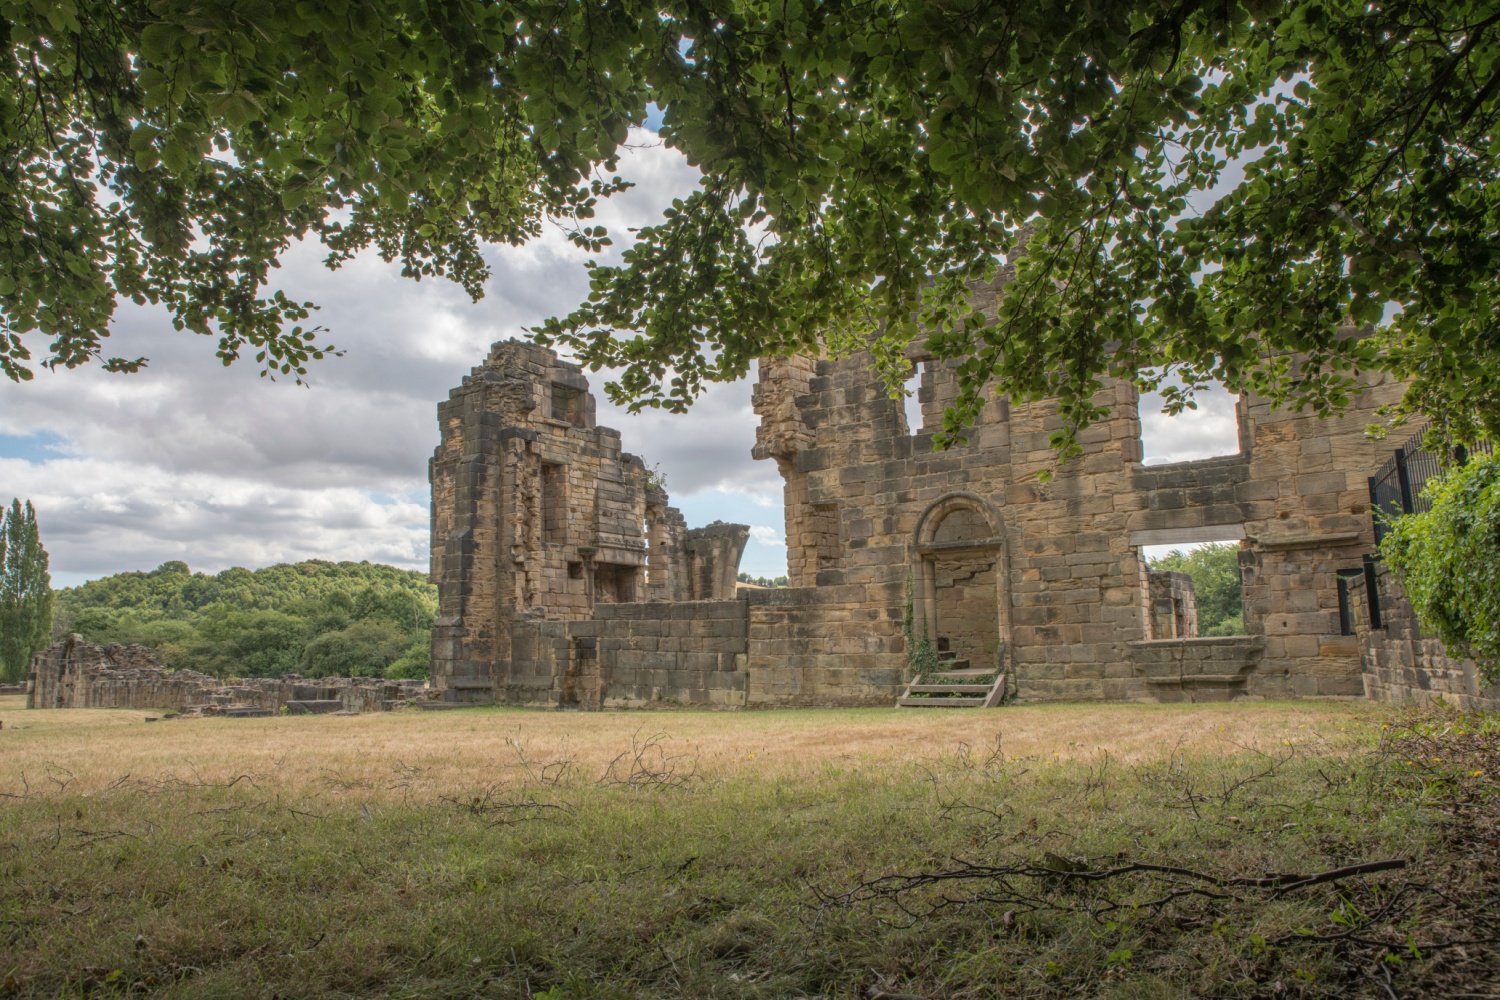 Image name monk bretton priory barnsley south yorkshire the 11 image from the post A look at the history of Monk Bretton Priory, Barnsley, with Dr Emma Wells in Yorkshire.com.